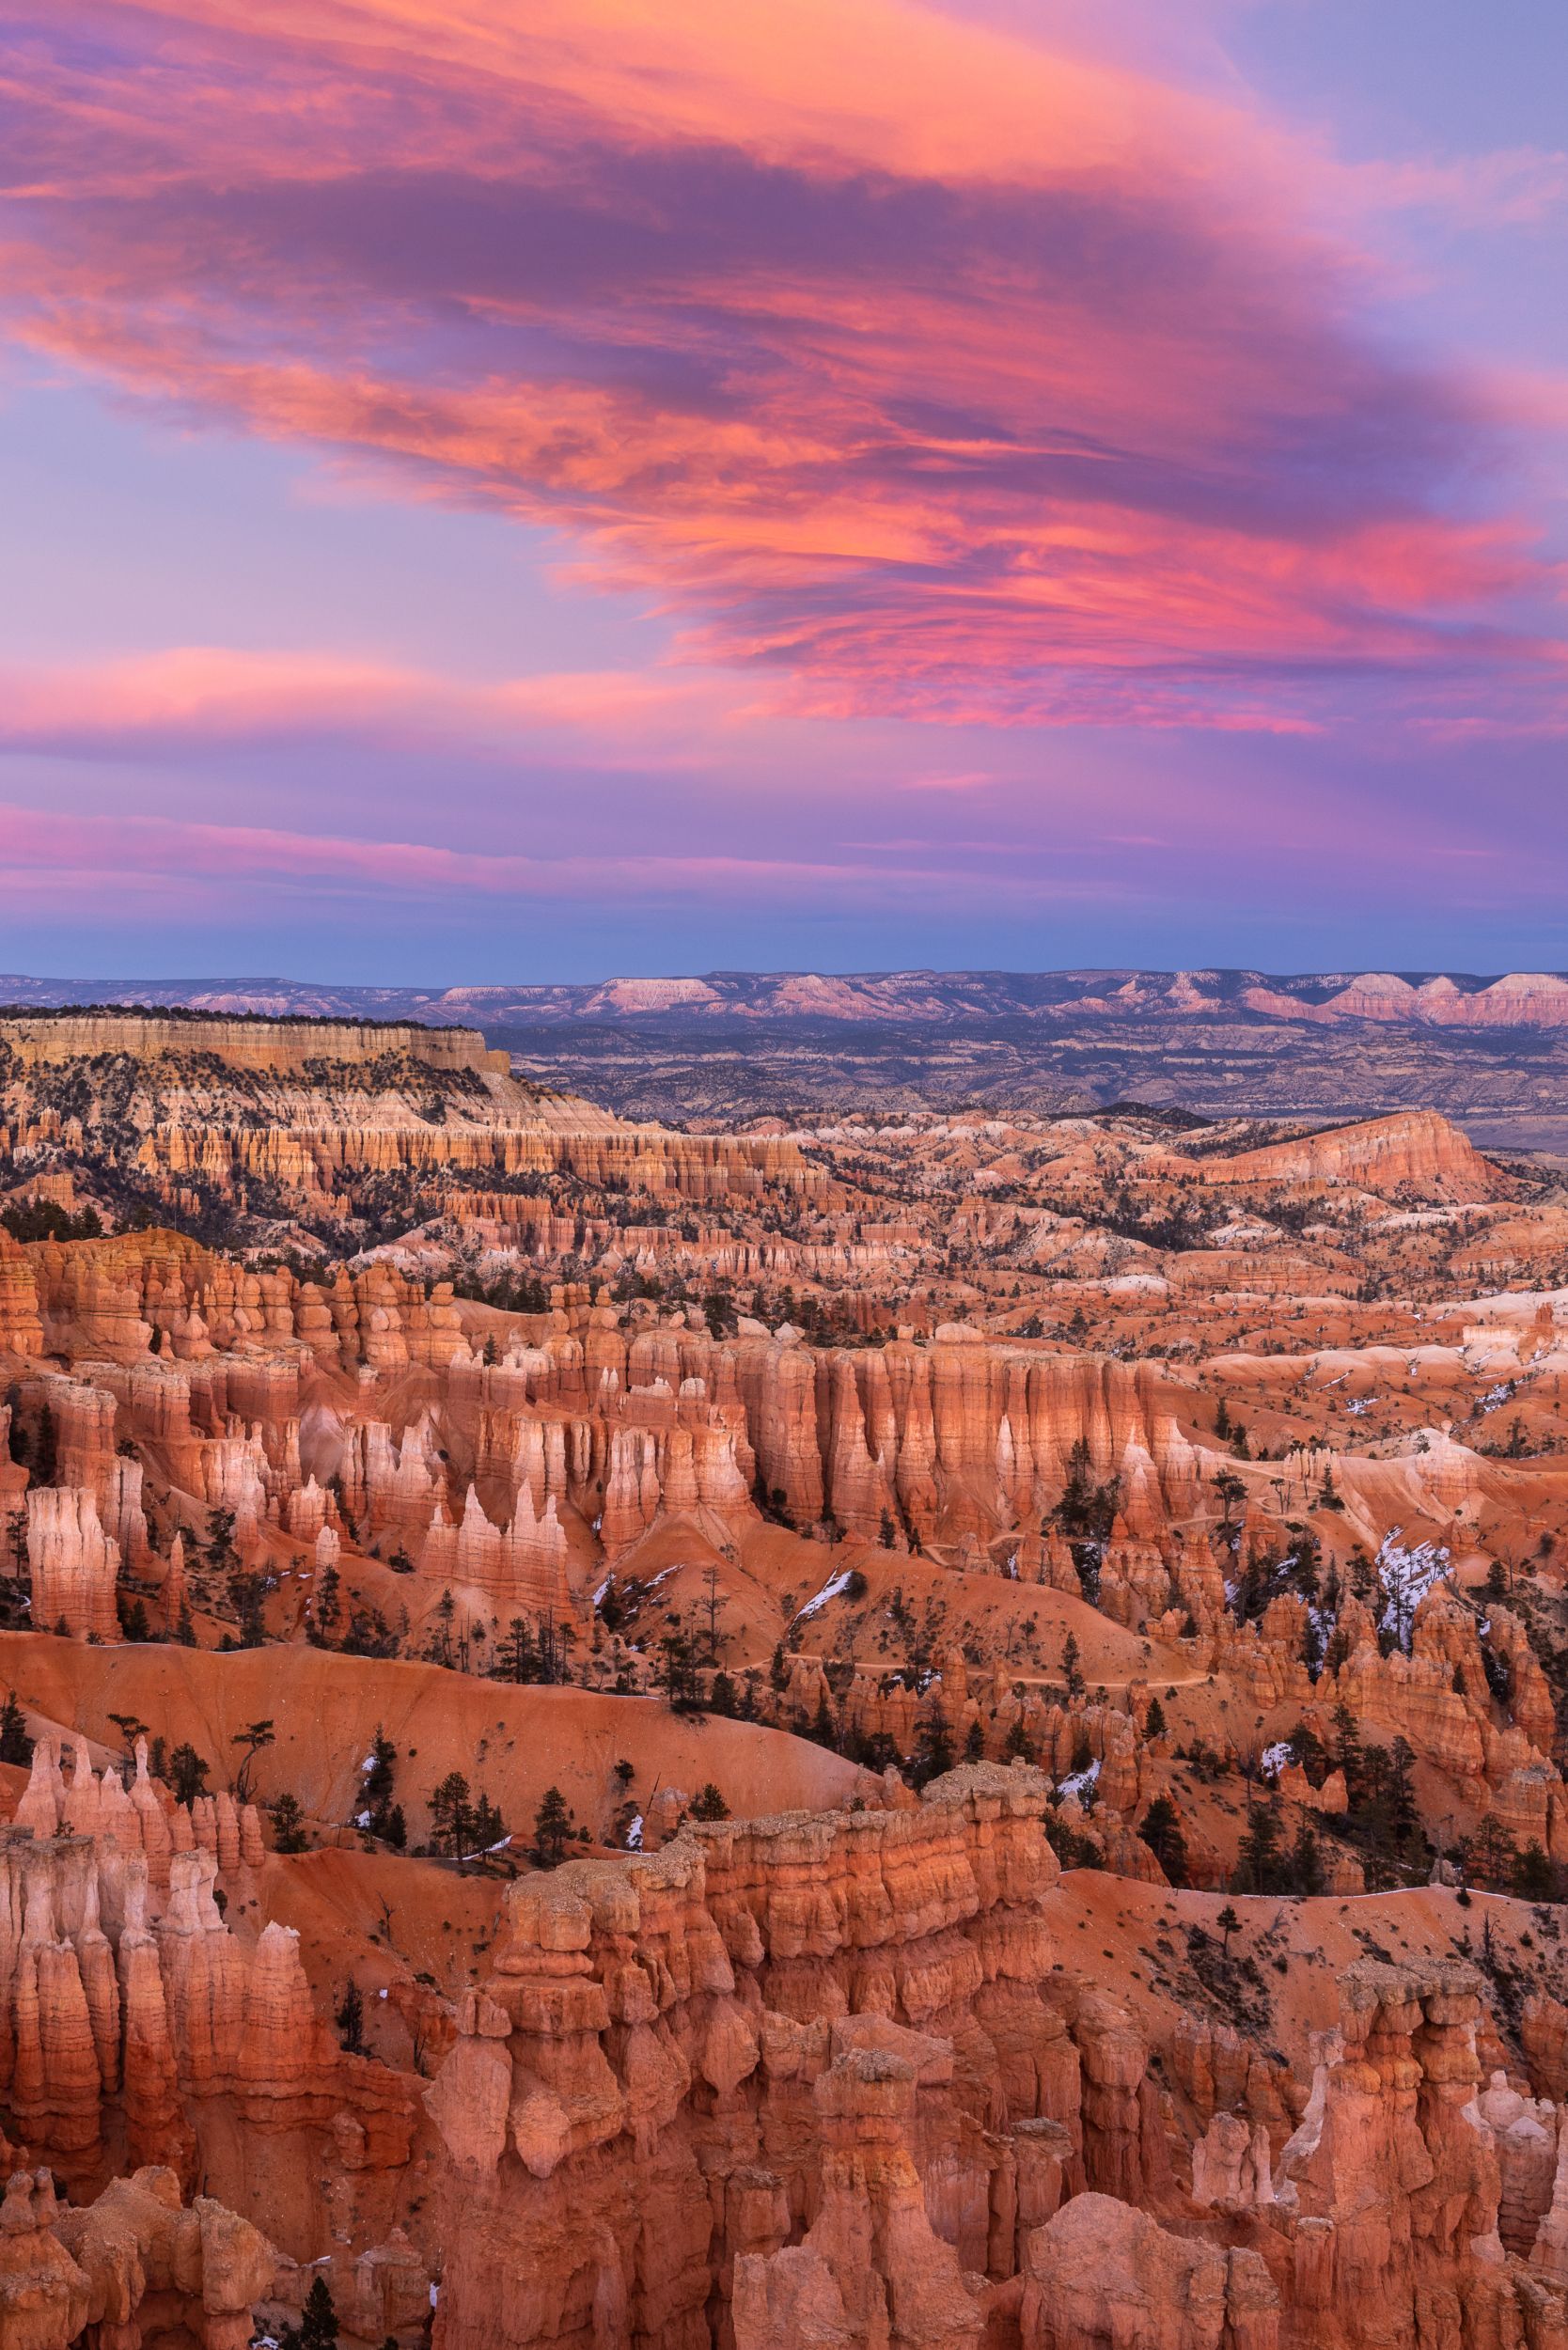 YETI: Our Brightest Red – Like Sunset in the Canyon